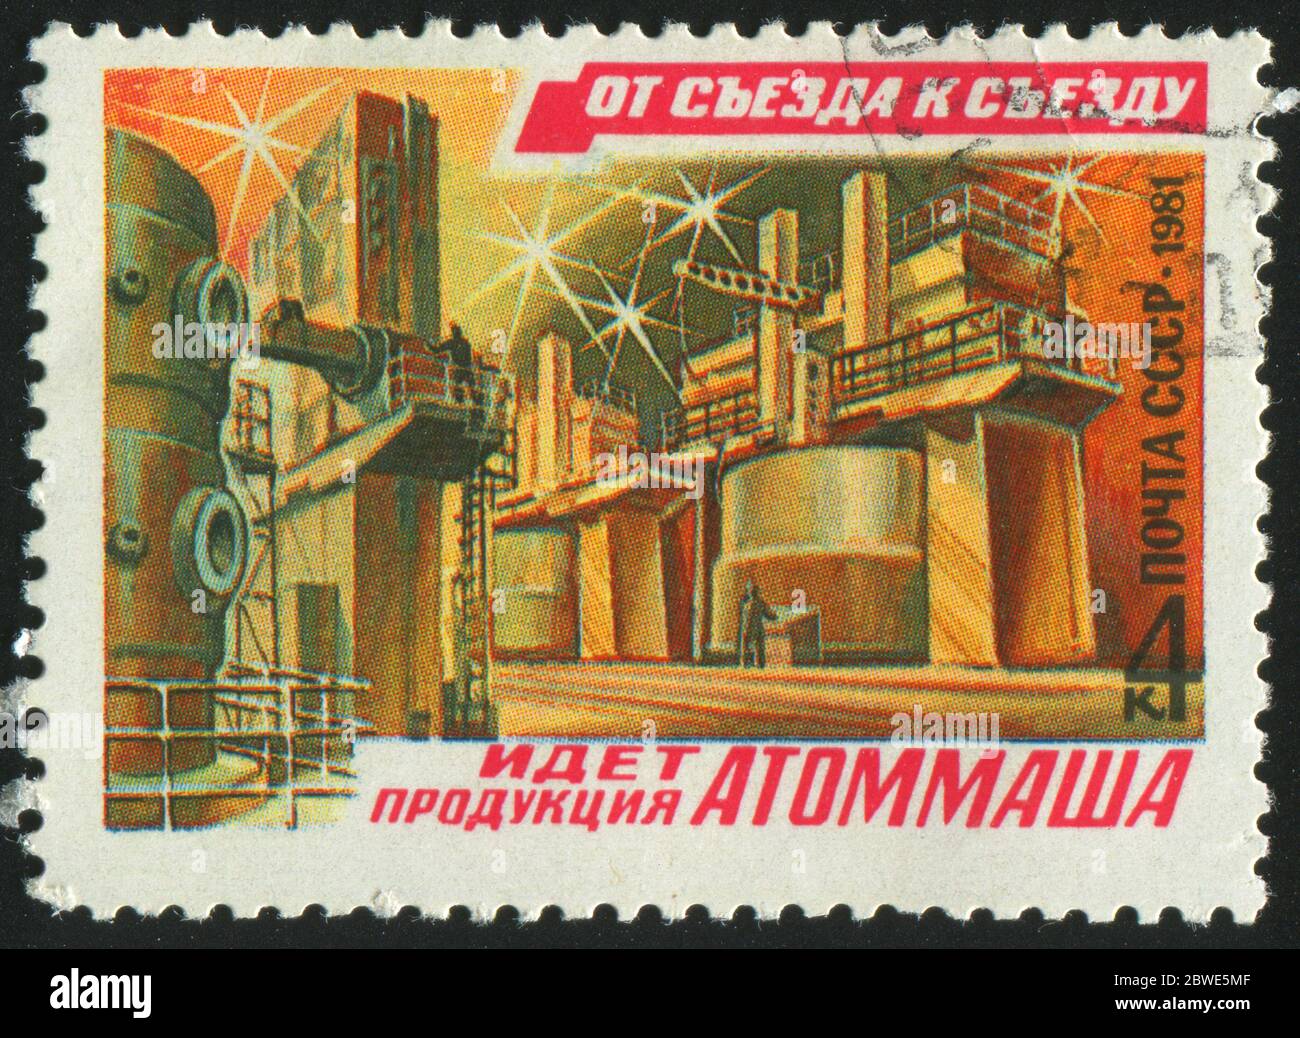 RUSSIA - CIRCA 1981: stamp printed by Russia, shows Atomic power plant, circa 1981. Stock Photo